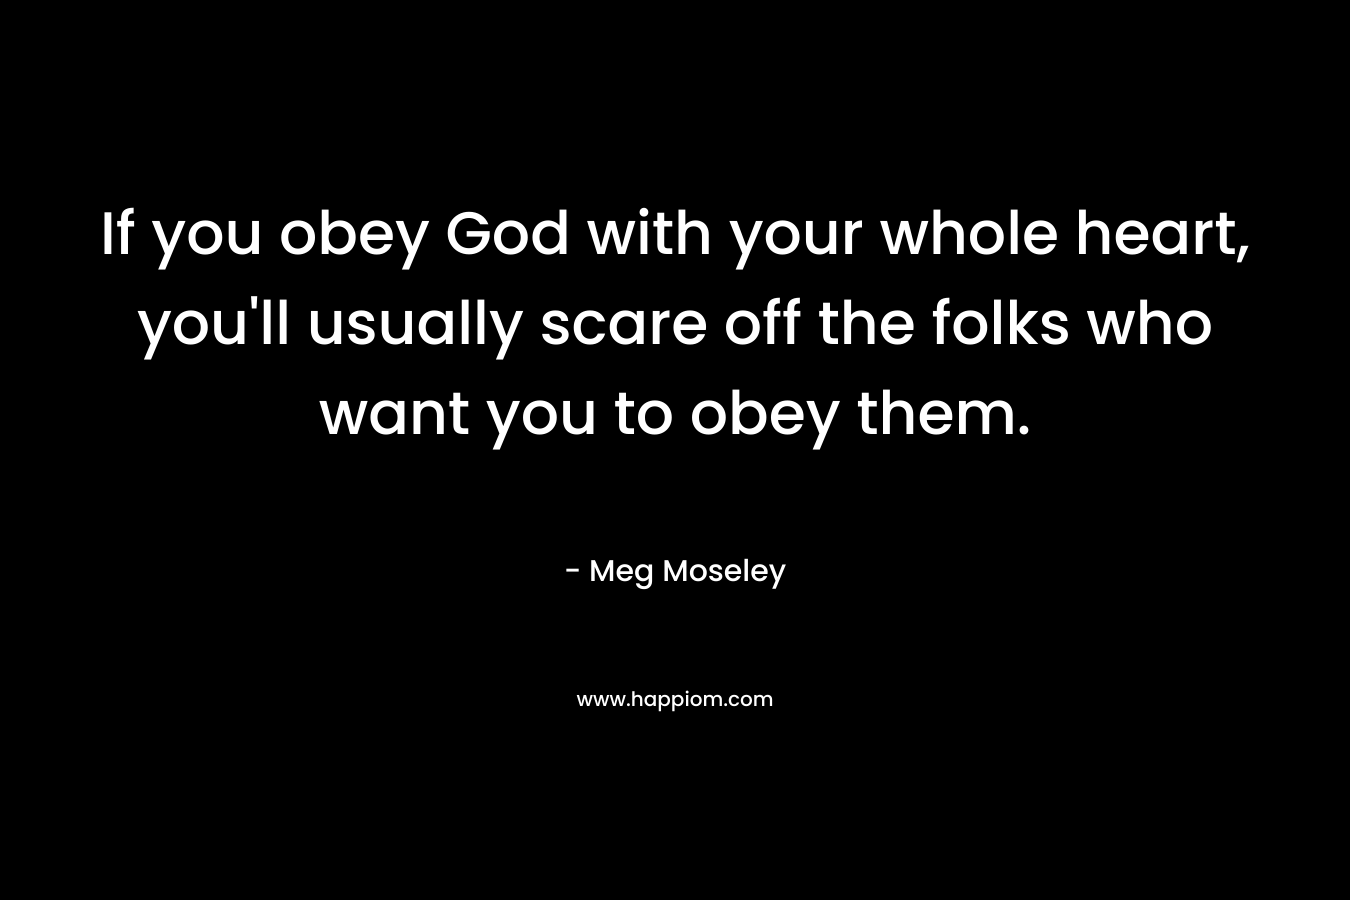 If you obey God with your whole heart, you’ll usually scare off the folks who want you to obey them. – Meg Moseley